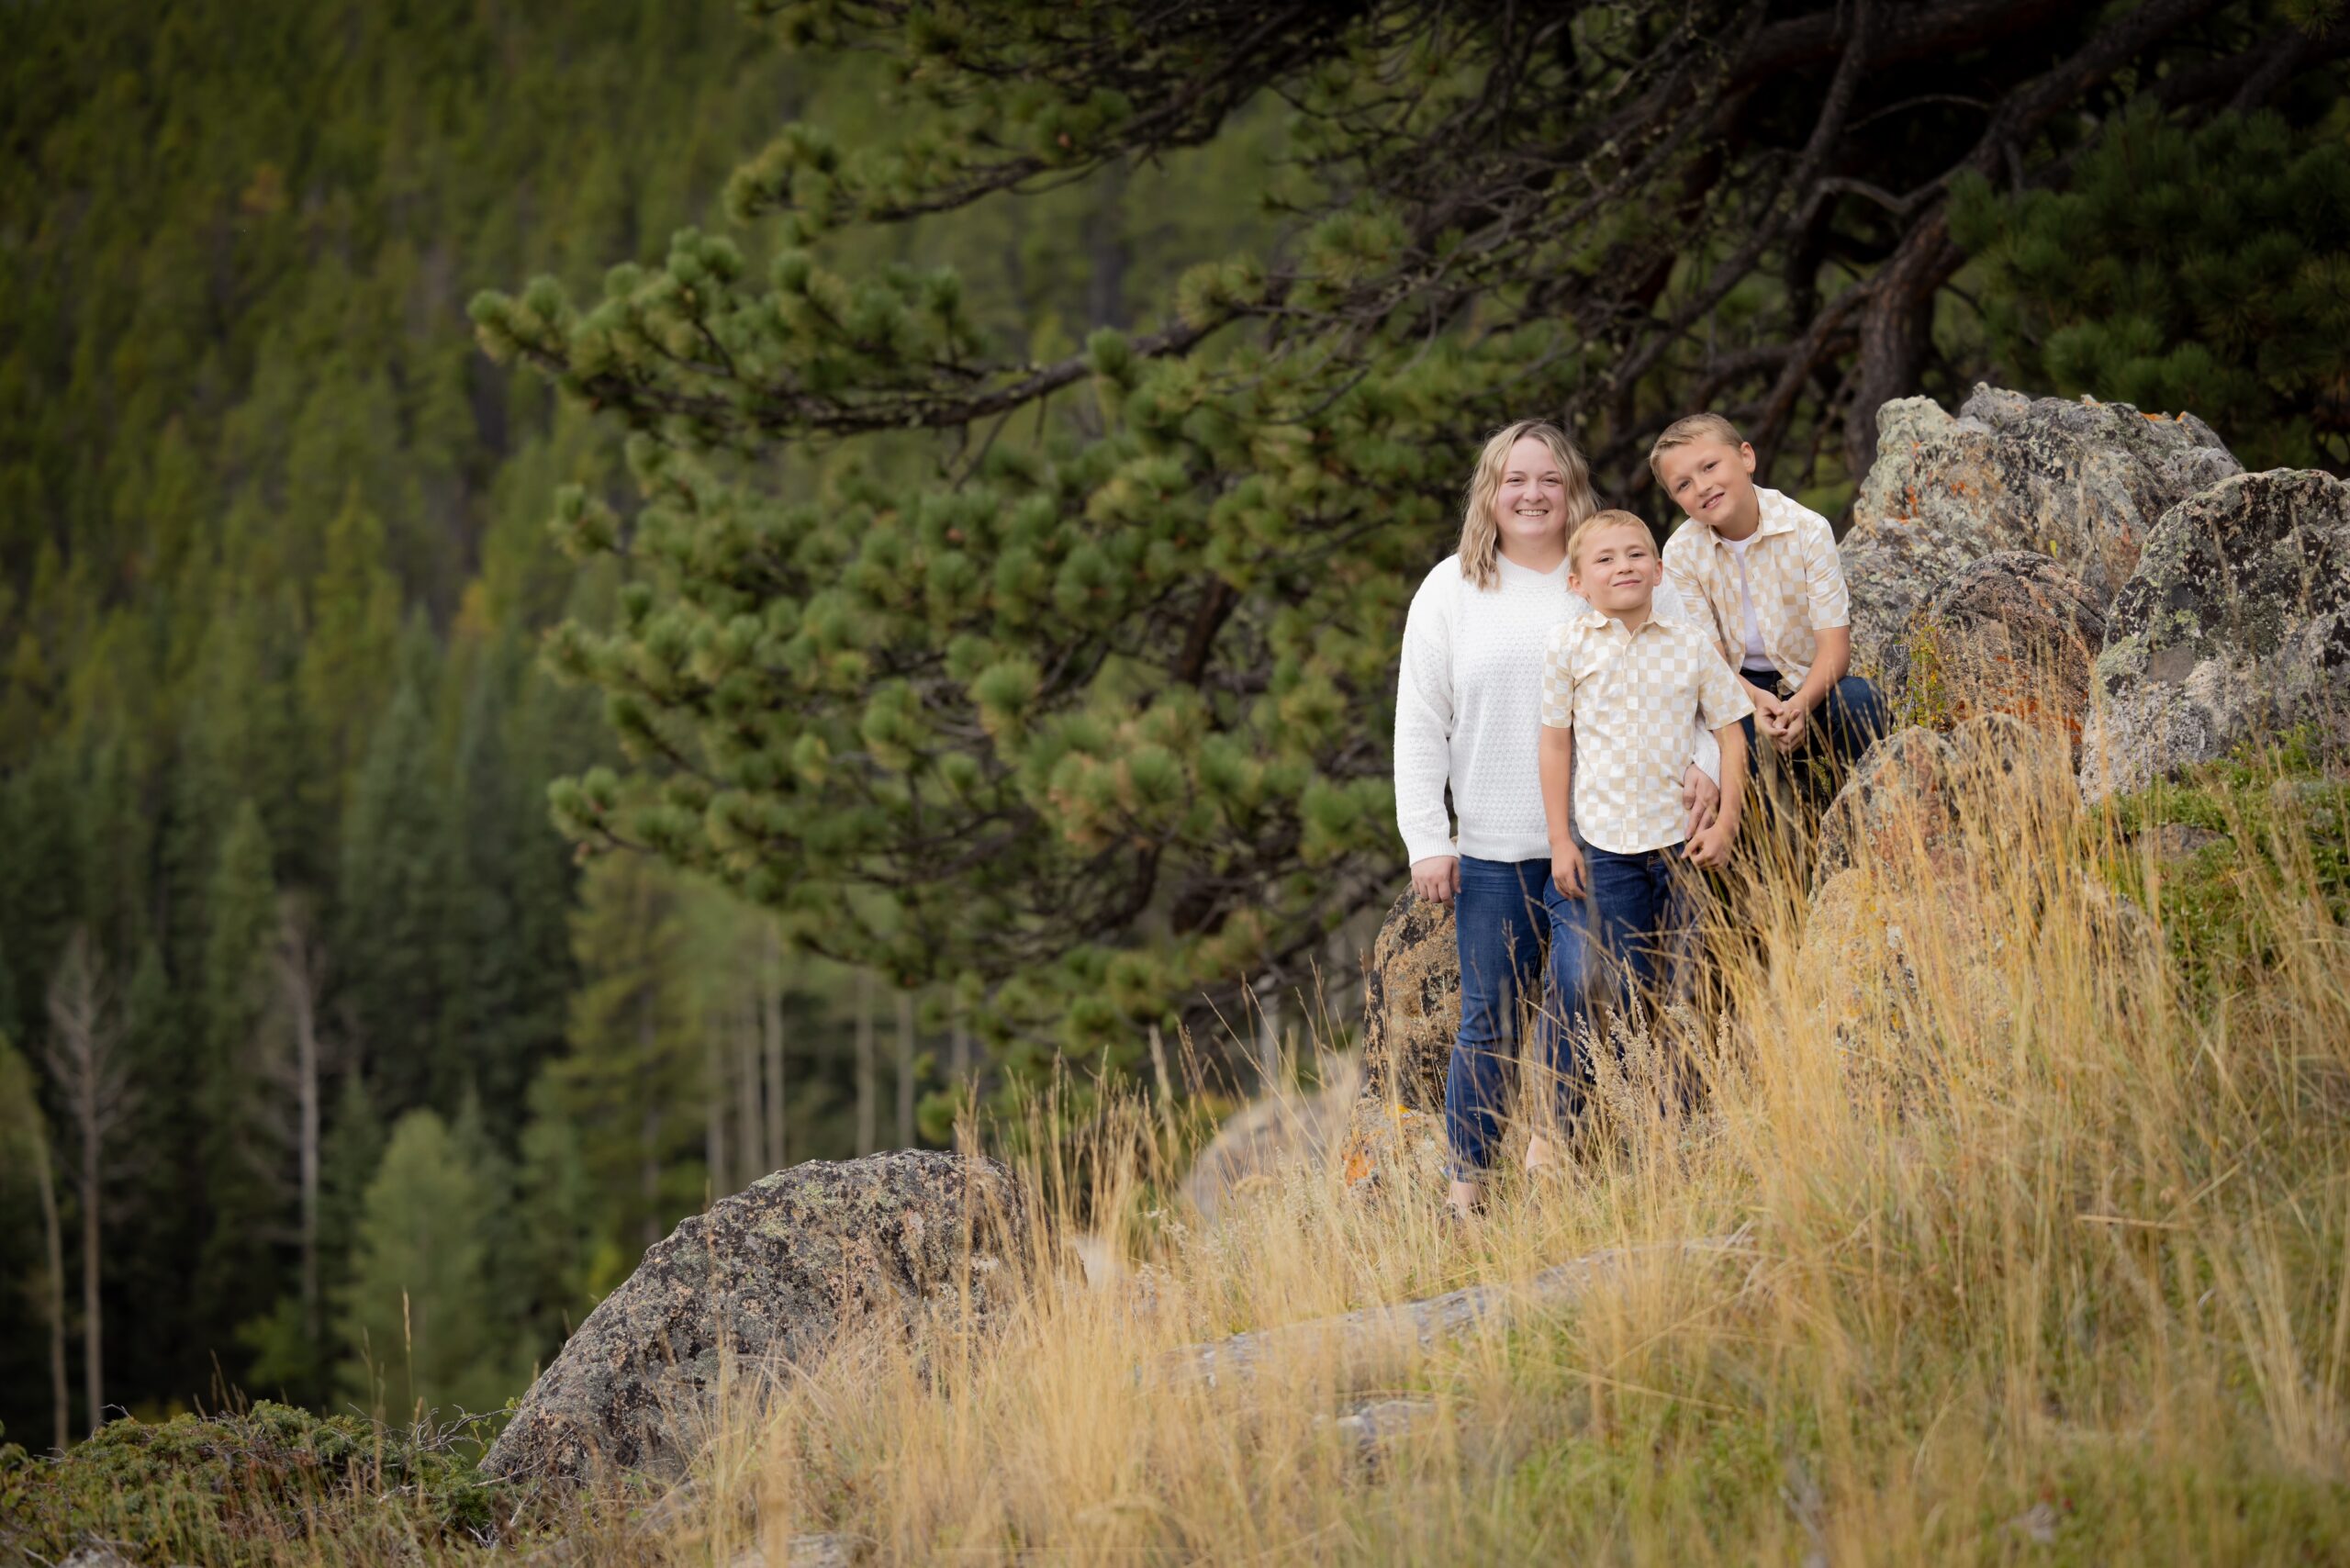 5 Helpful Tips to Prepare for Wyoming Outdoor Family Photos